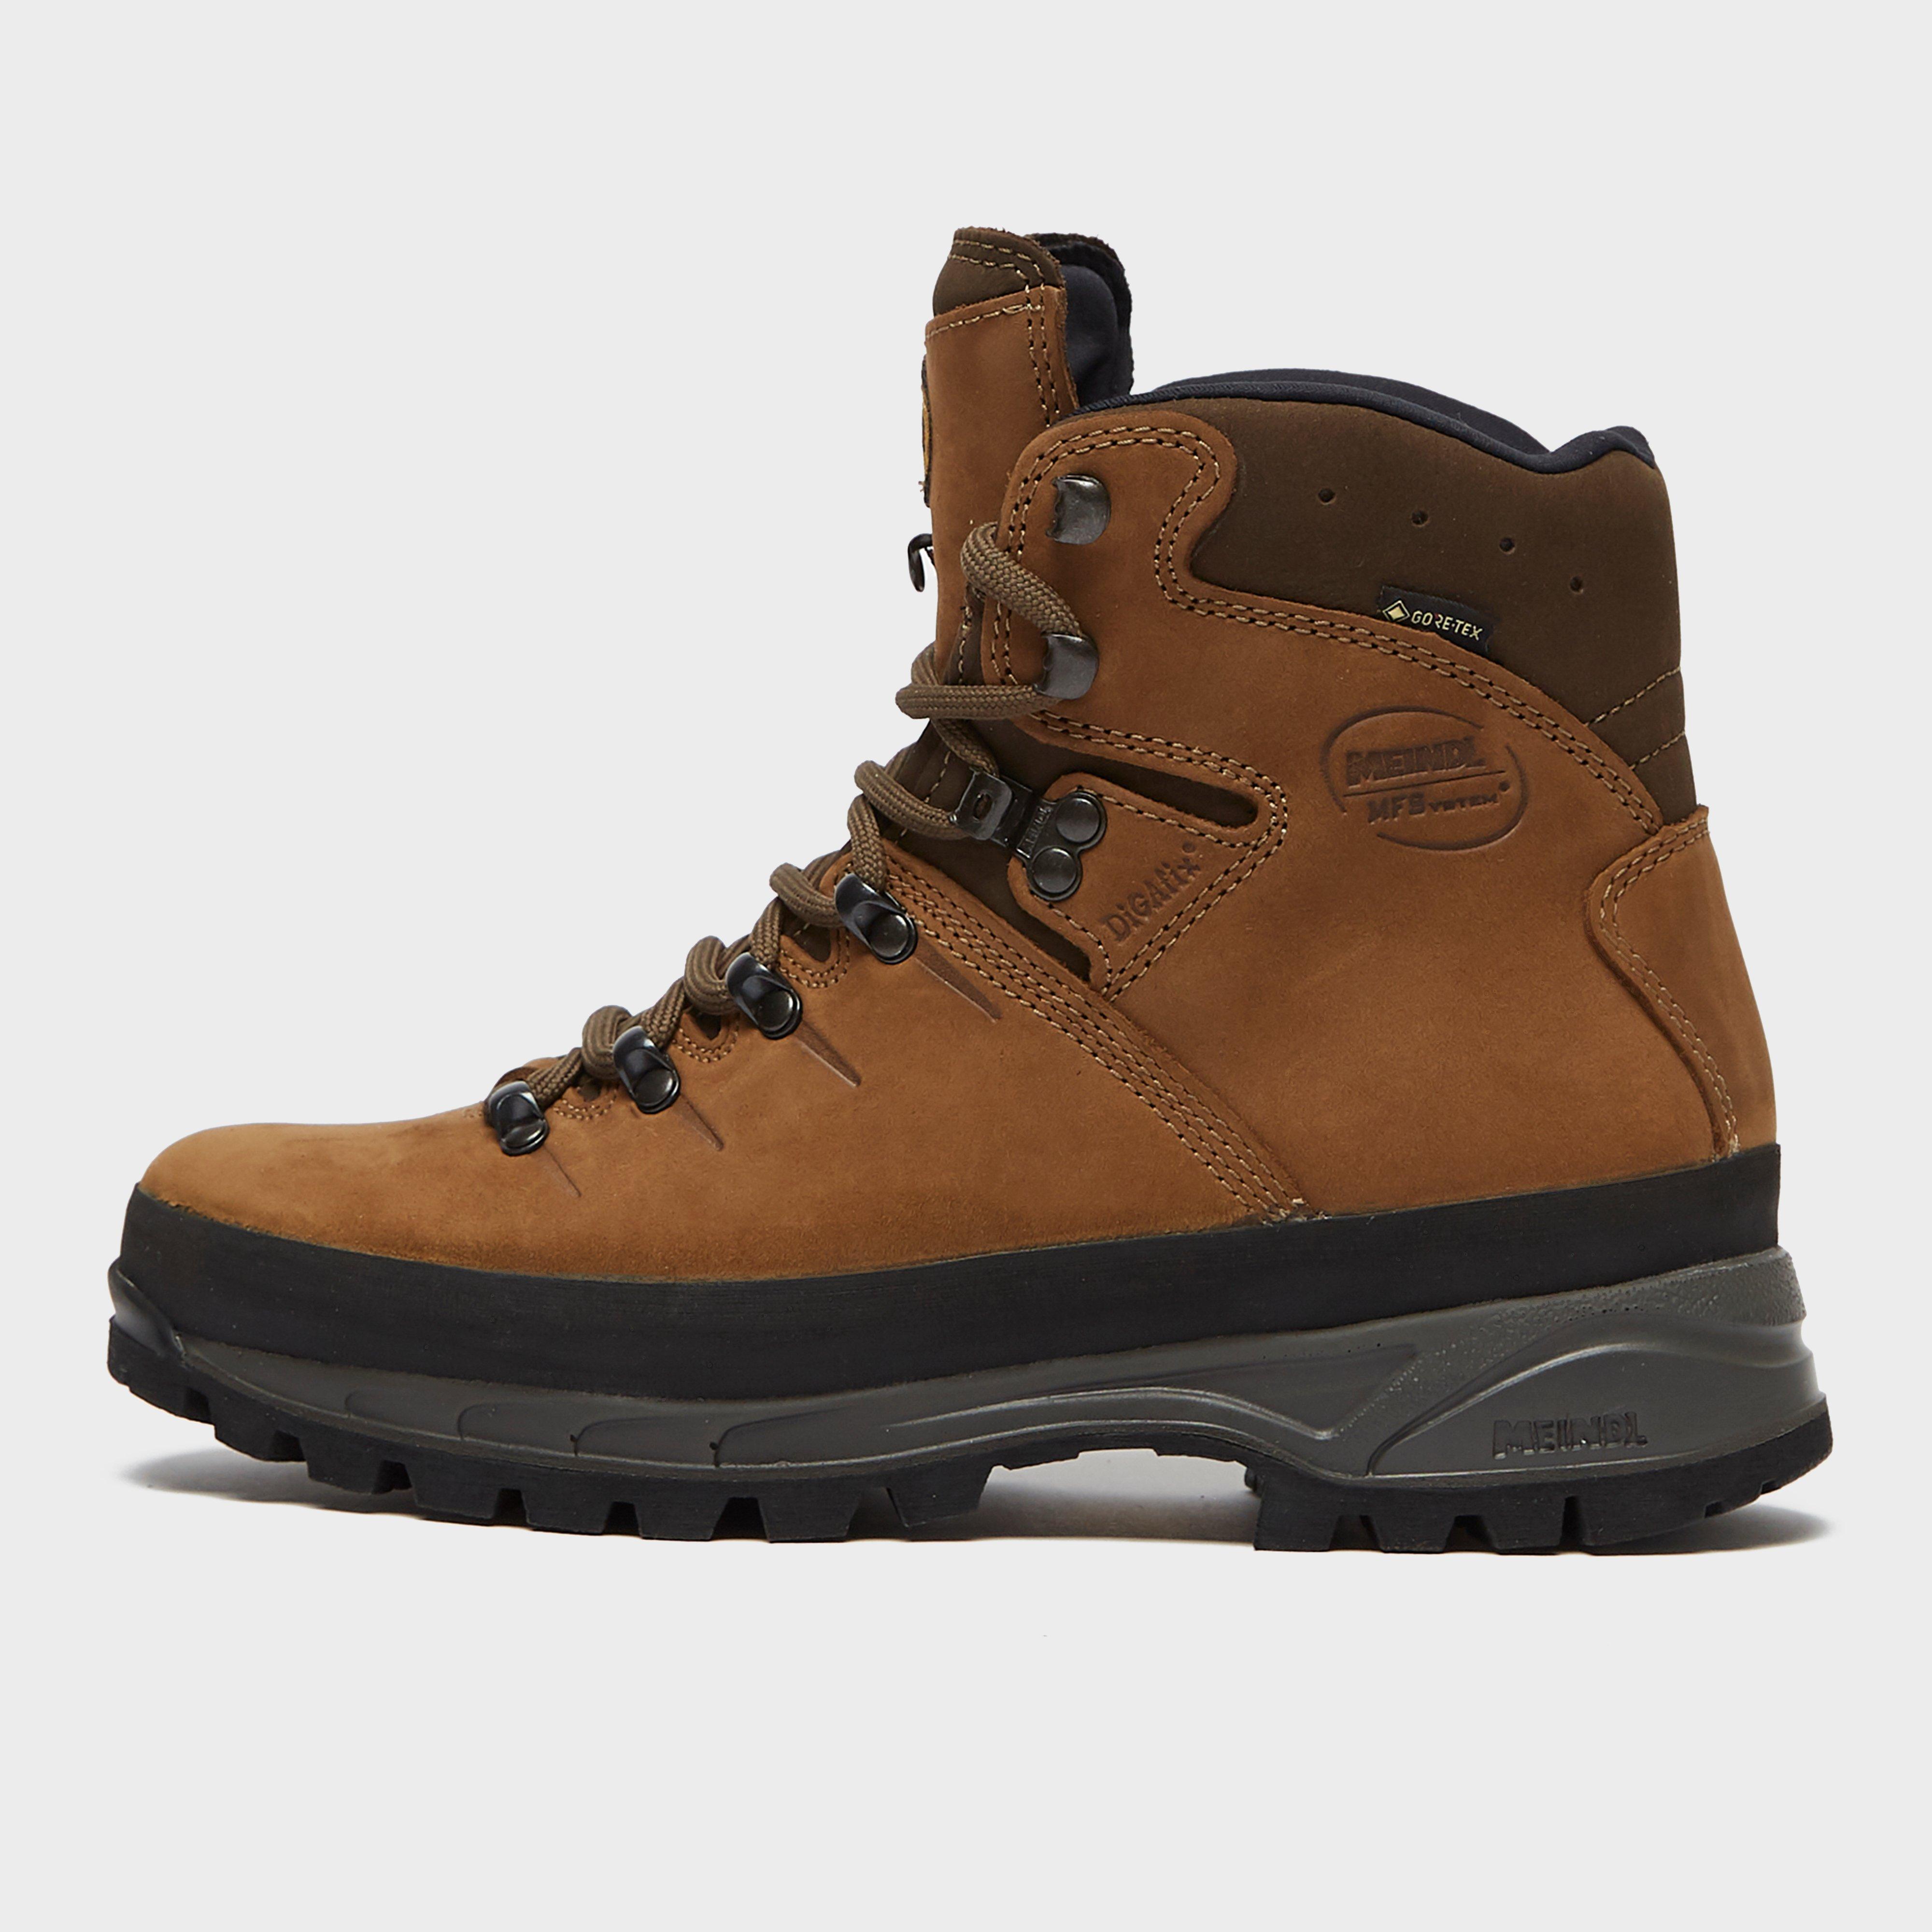 meindl boots go outdoors